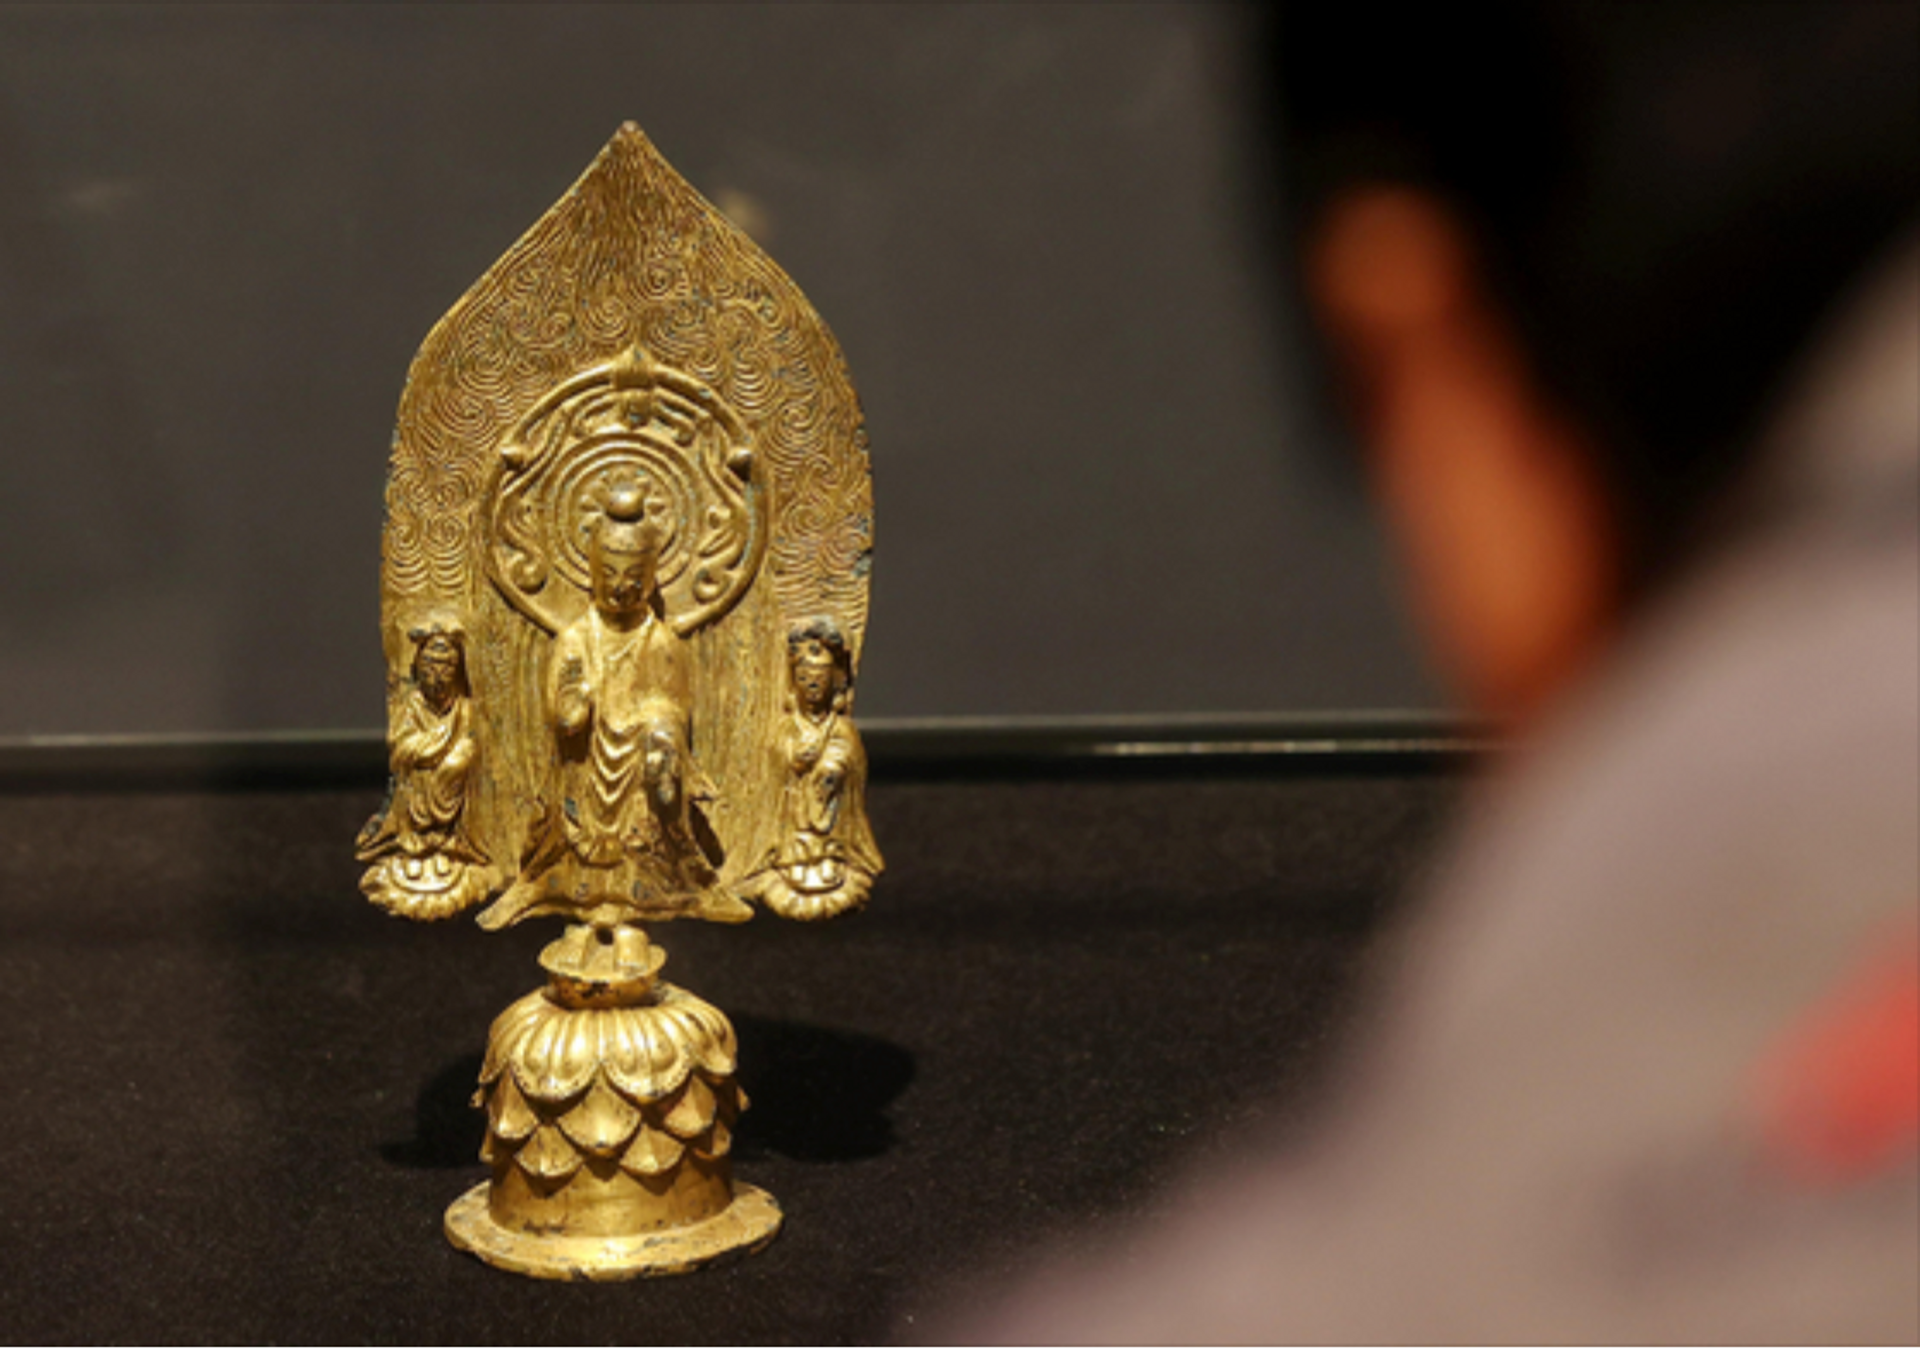 A sixth-century gilt-bronze Standing Buddha Triad with Inscription of "Gyemi Year" will be offered for sale by K Auction later this month. Courtesy of K Auction